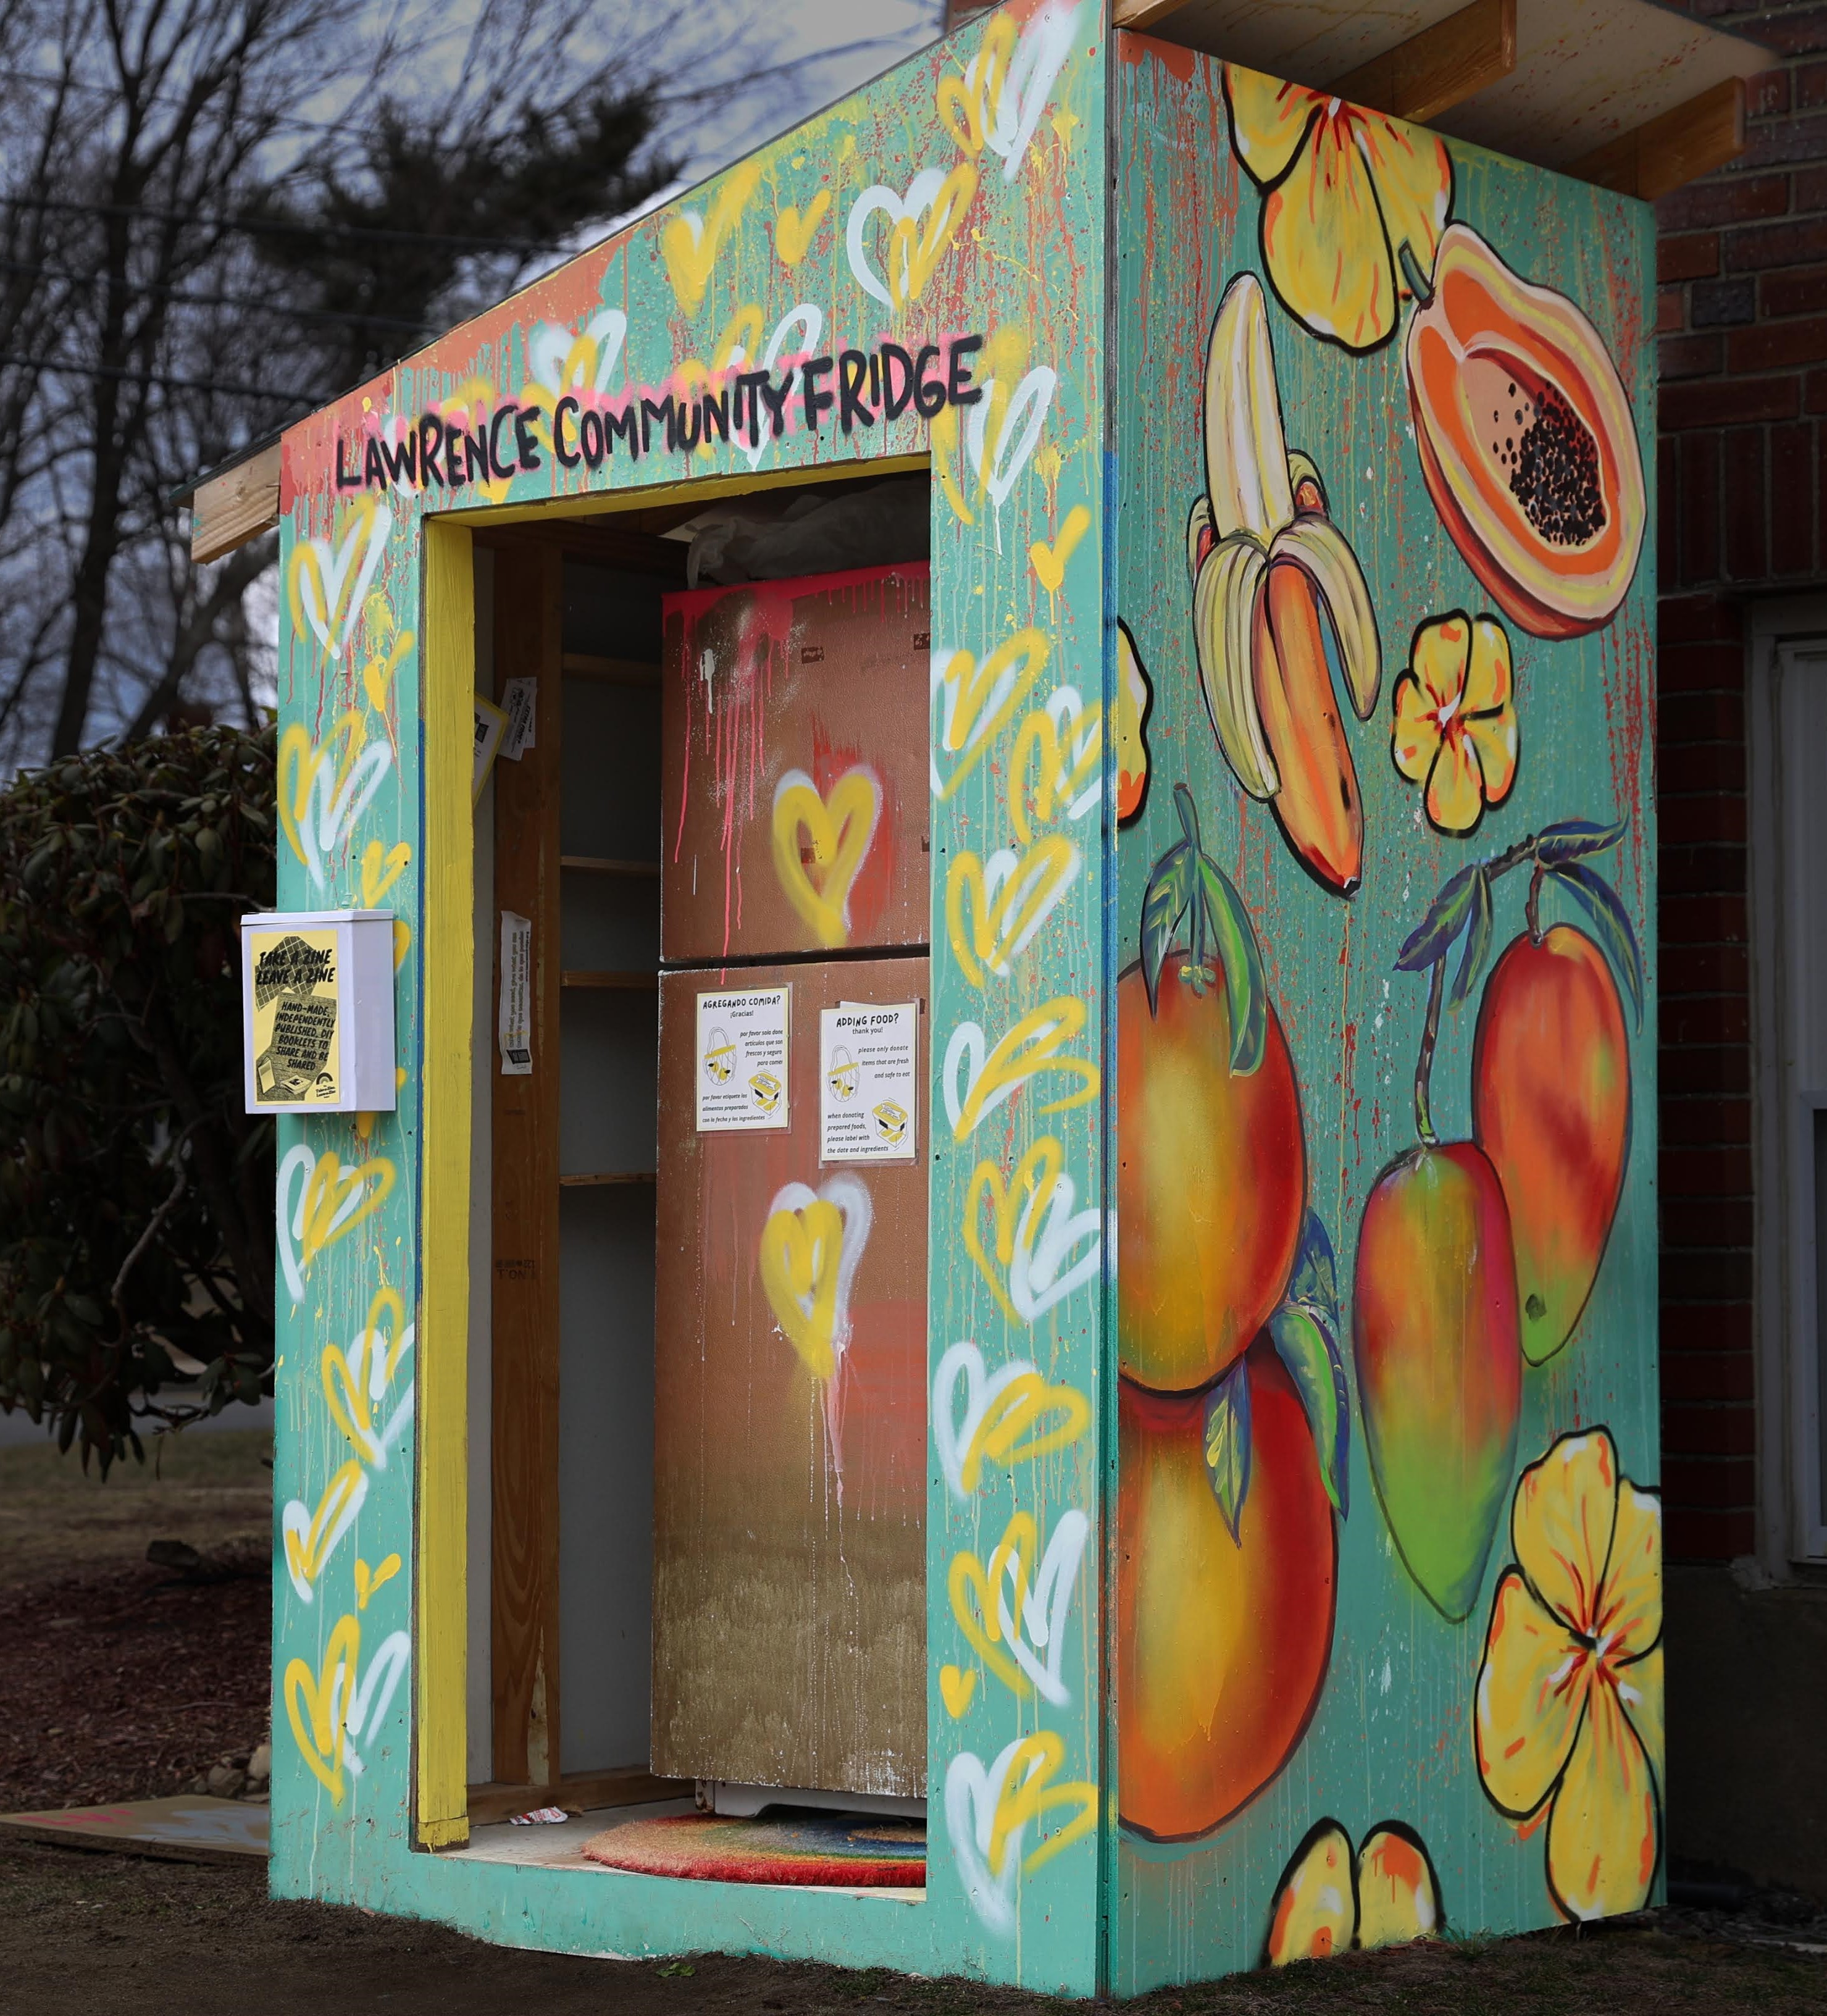 color photo of a refrigerator housed by a shed, both are outside on a grassy area against a brick wall. the shed and fridge are spraypainted many colors. text above the doorway reads 'lawrence community fridge'